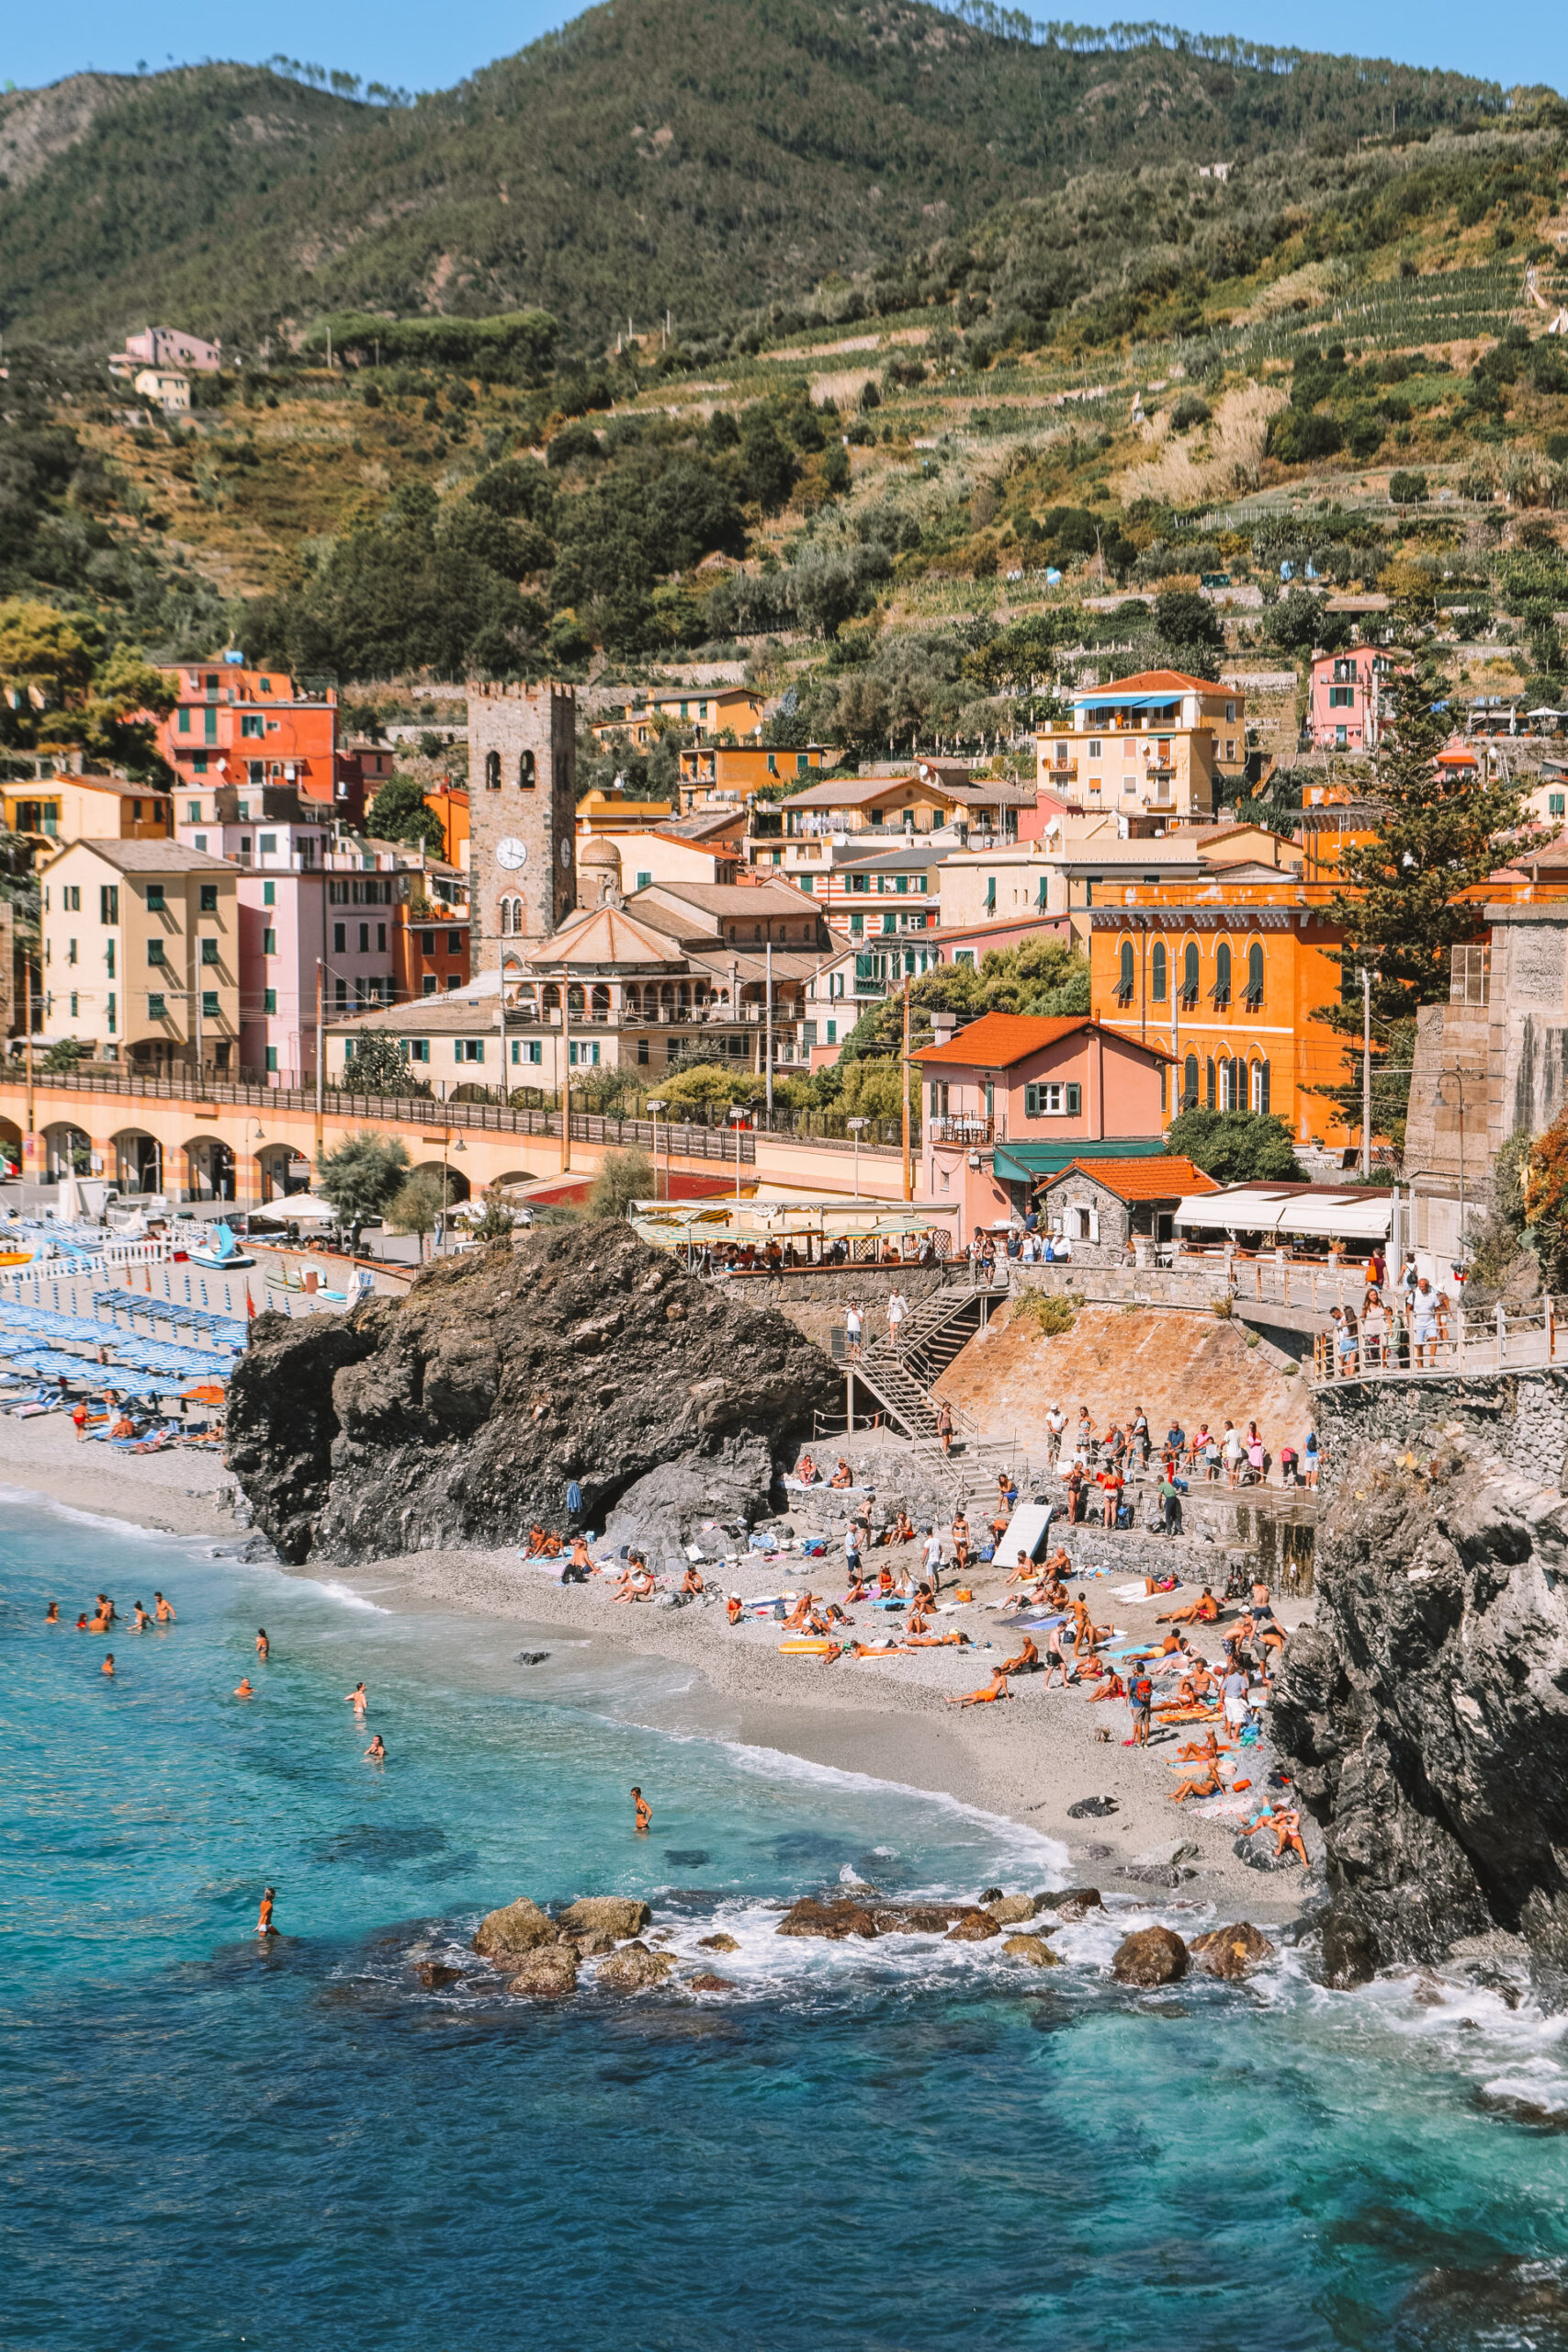 10 Incredible Things To Do In Cinque Terre, Italy